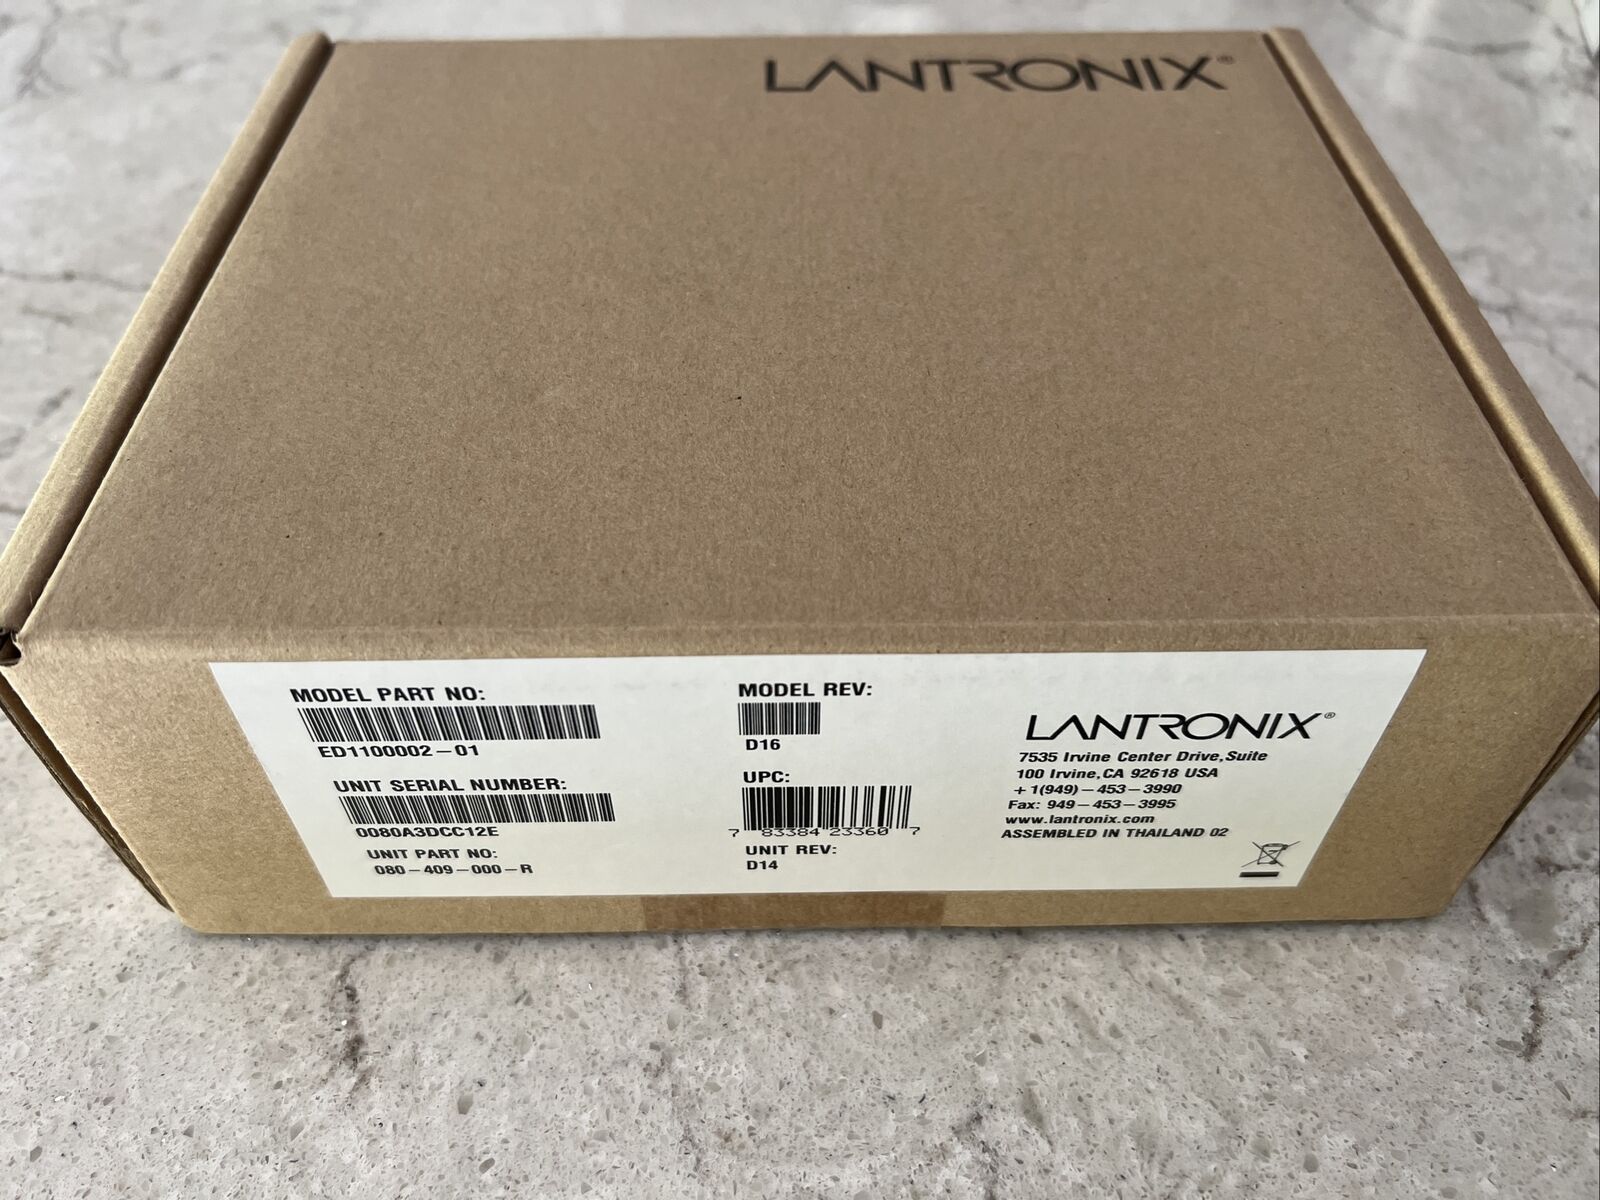 Lantronix EDS1100 ED1100002-01 1 Port Serial RS232/422/485 To Ethernet IP Secure